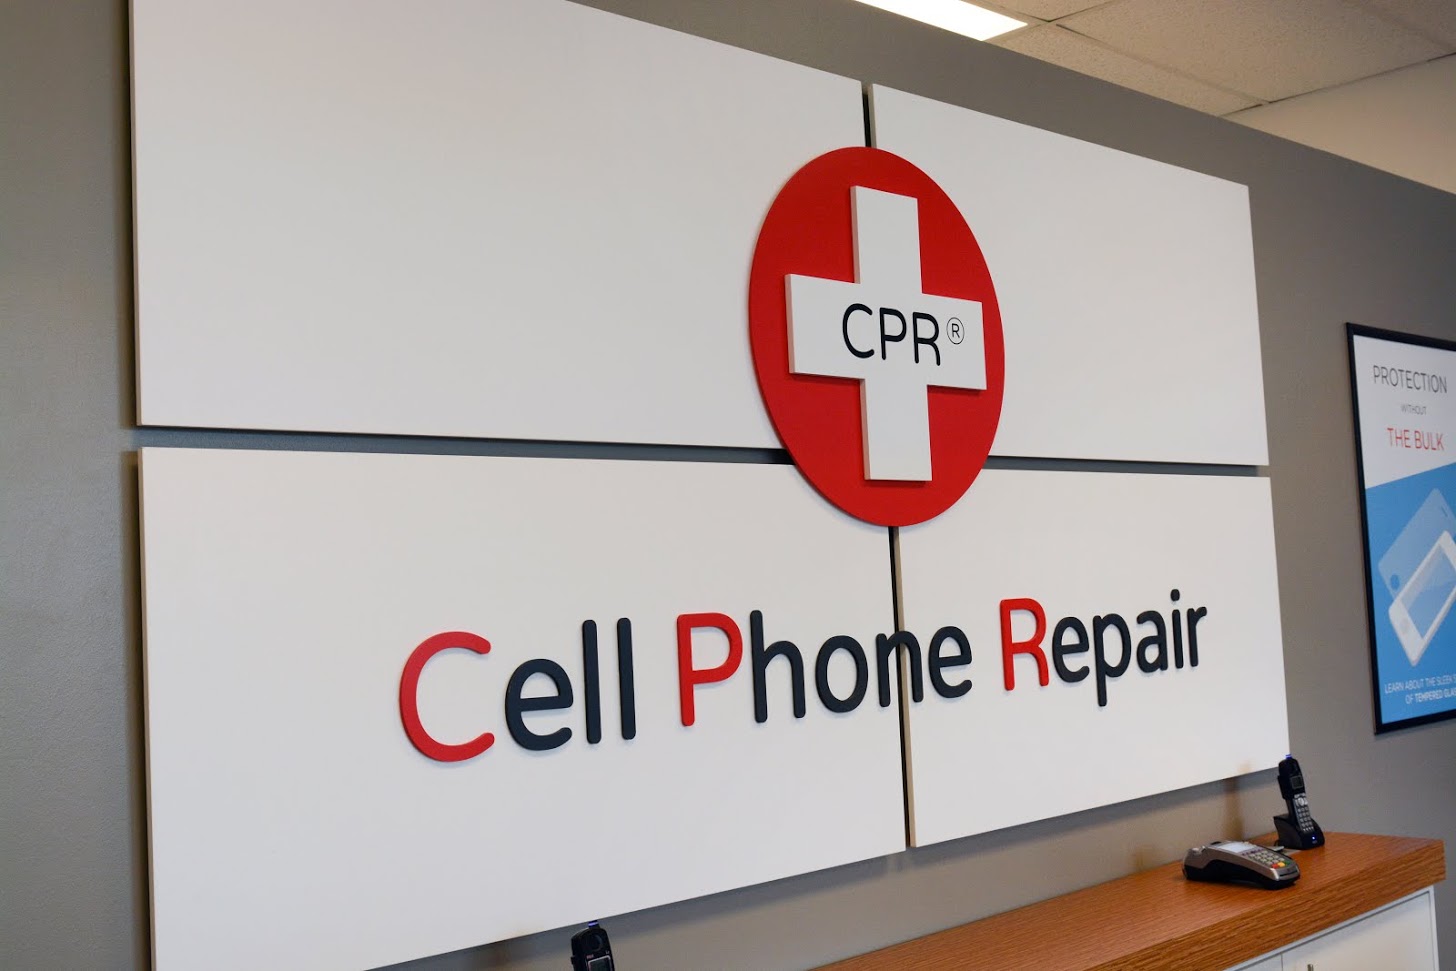 CPR Cell Phone Repair, Wednesday, August 21, 2019, Press release picture